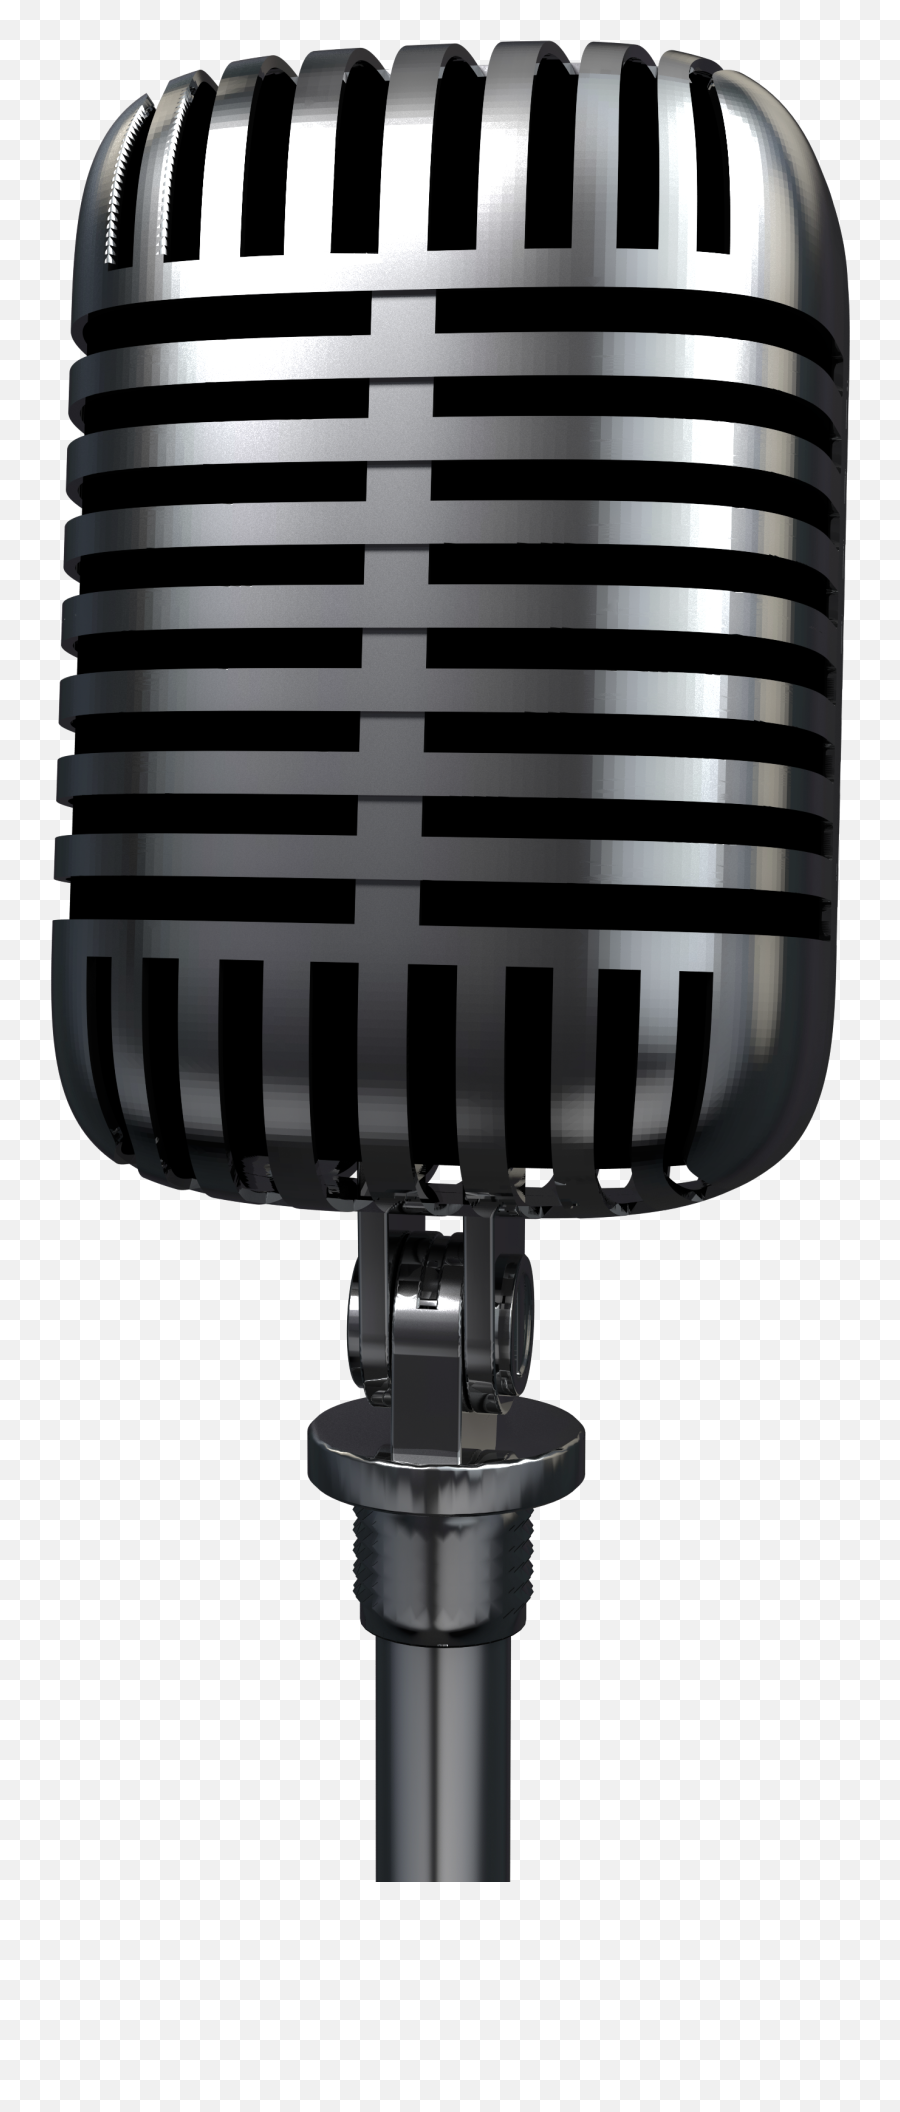 Radio Microphone Png Clipart - Full Size Clipart 3416250 Clip Art Emoji,Microphone Emoji Png